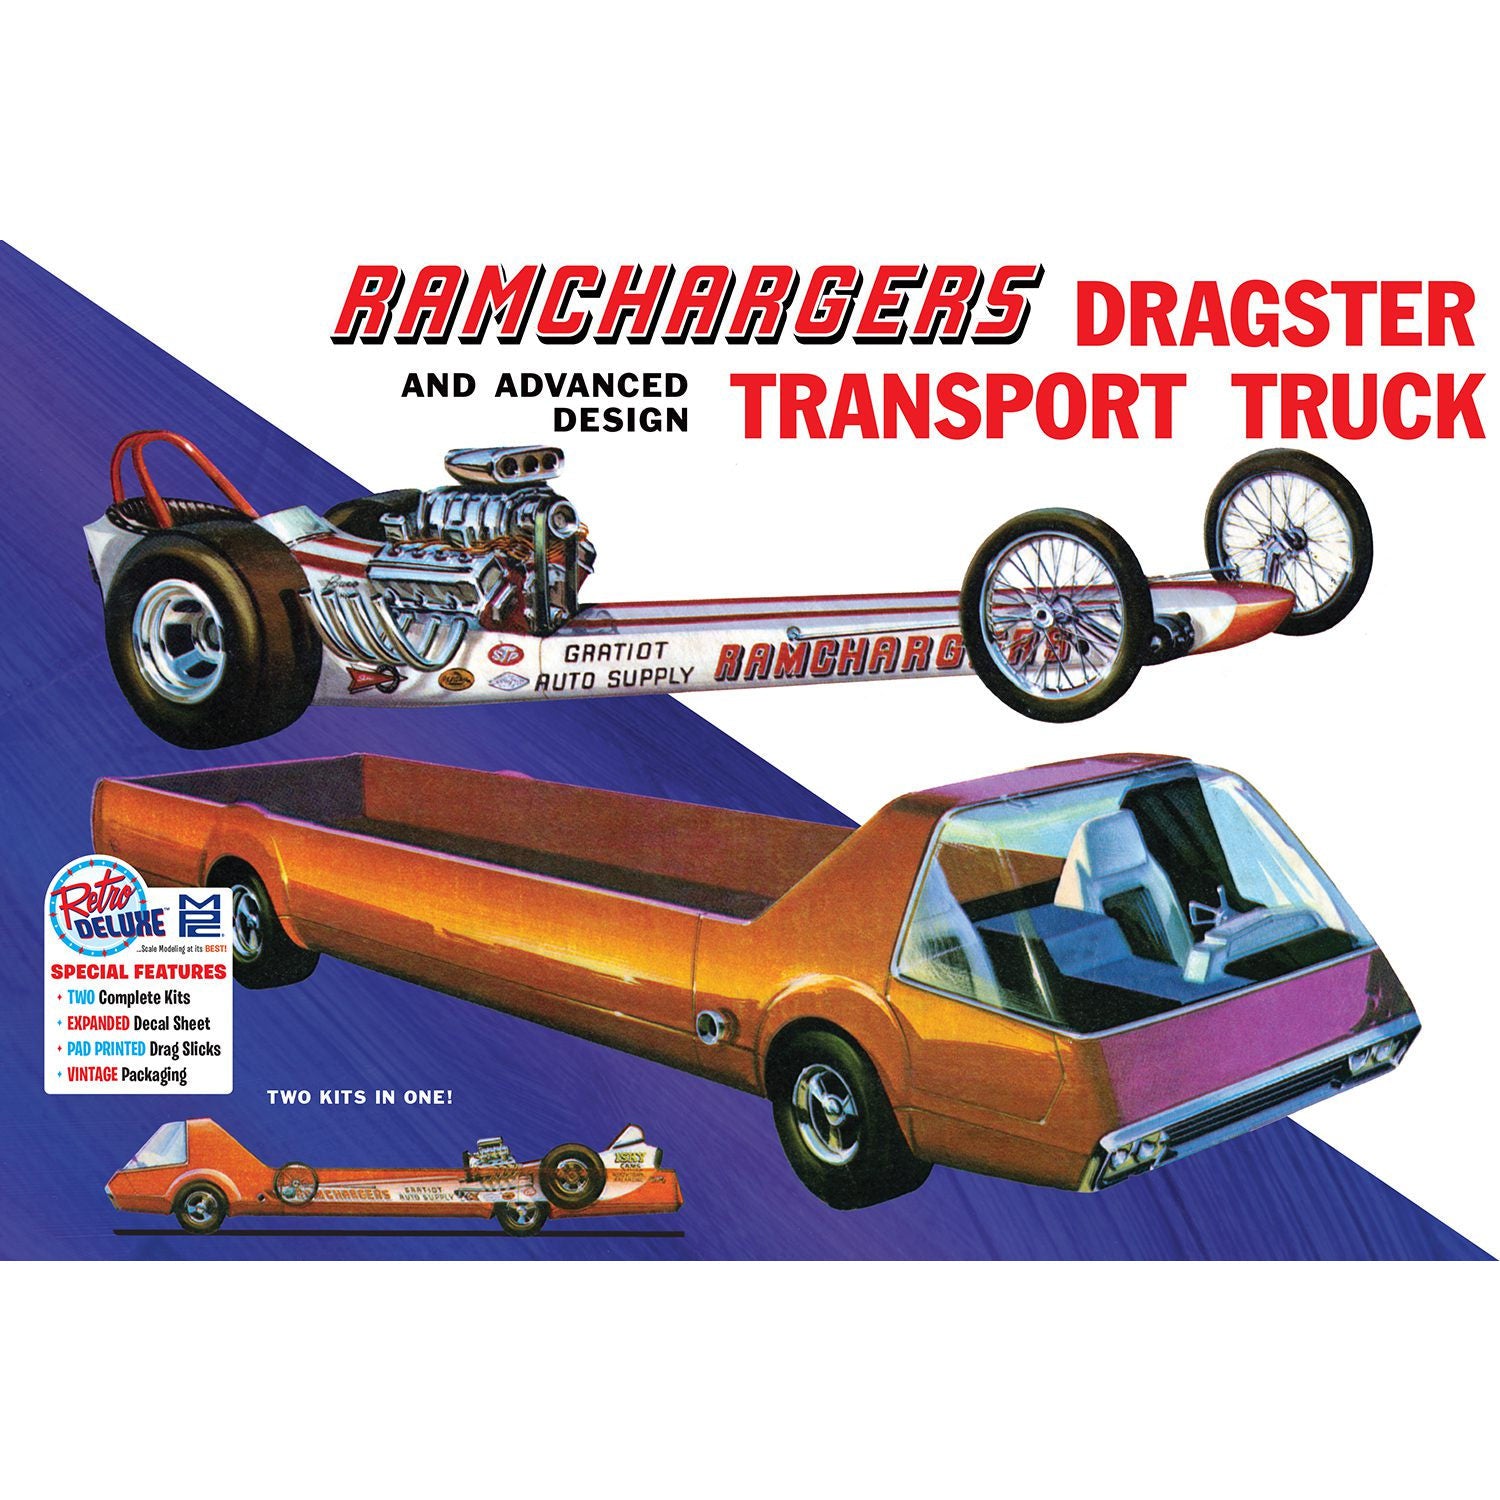 Ramchargers Transport Truck & Dragster 1/25 Model Truck Kit #970 by MPC